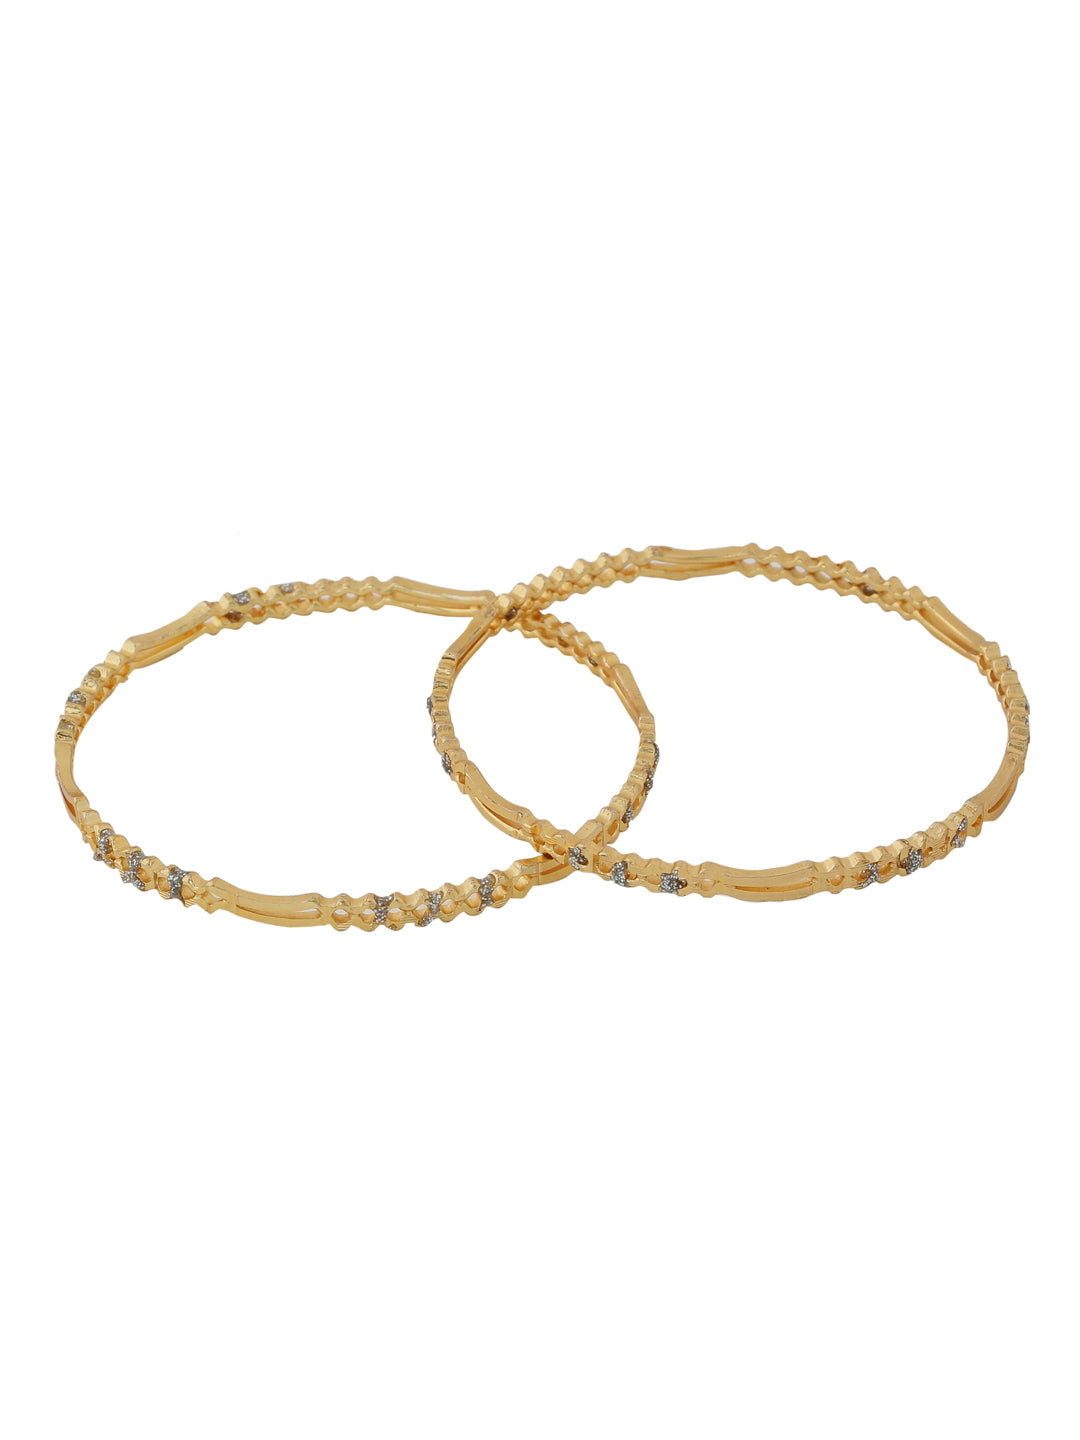 gold-plated-diamond-studded-antique-bangles-set-of-2-viraasi